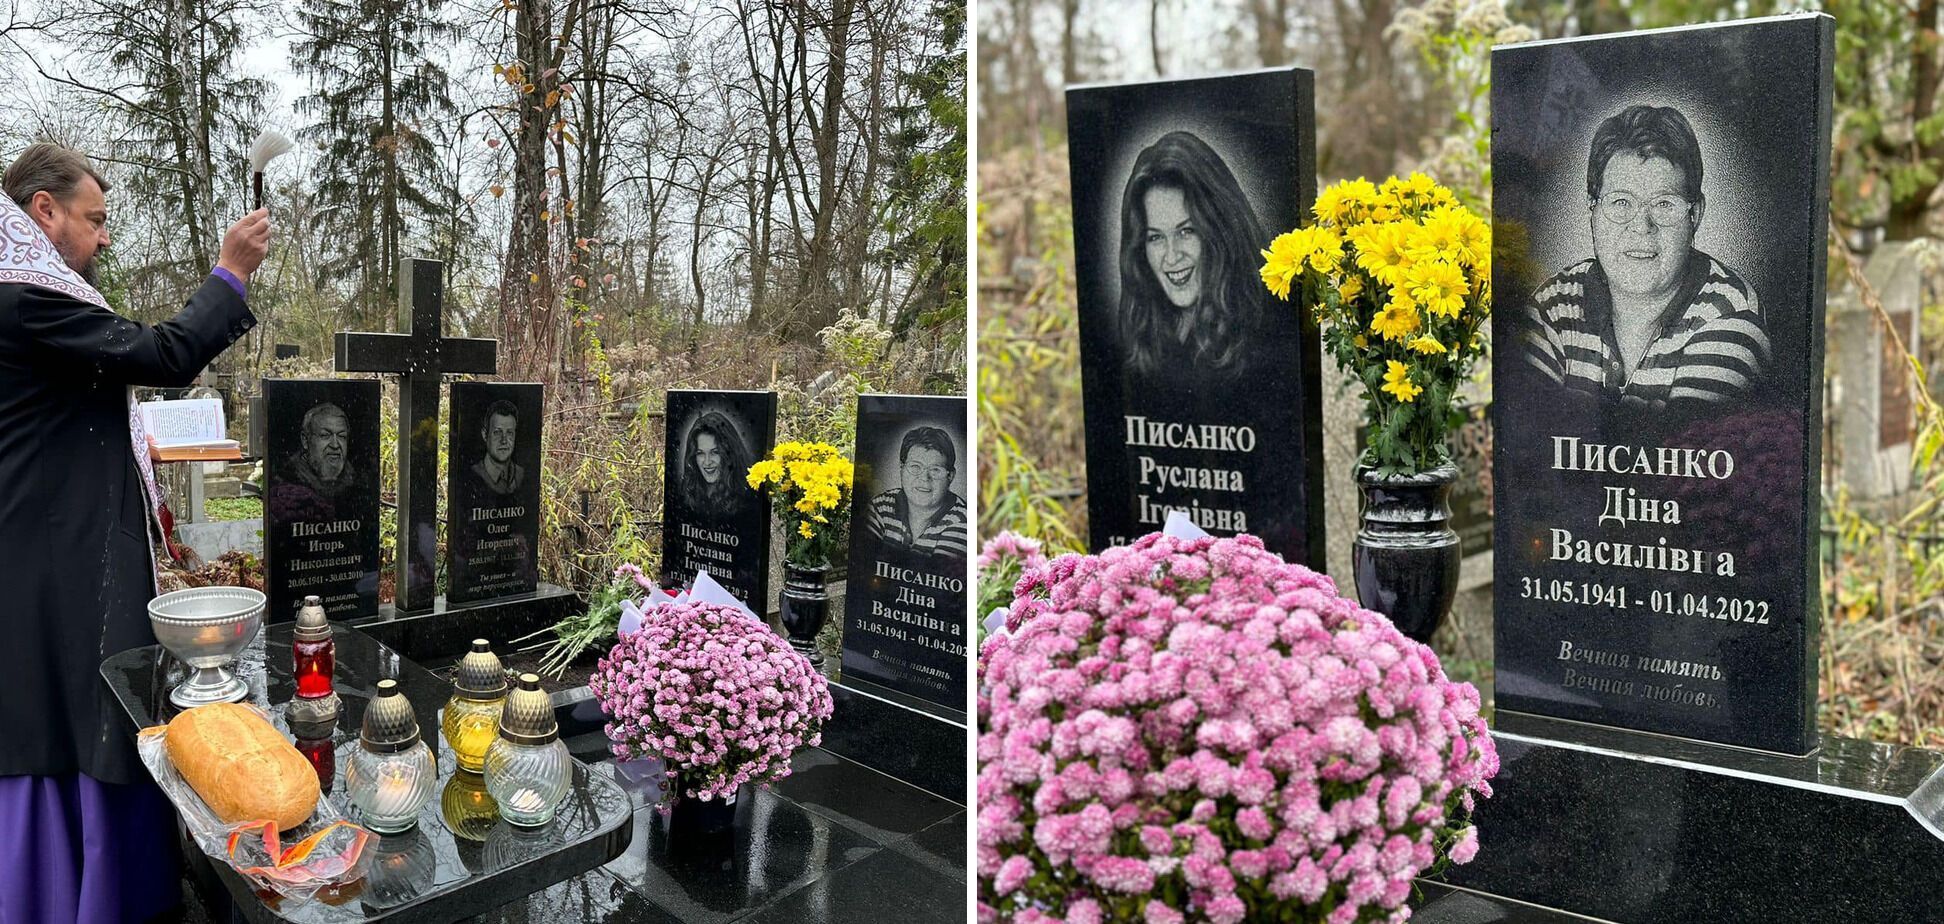 A monument has been placed on Ruslana Pysanka's grave: the actress would have turned 58. Exclusive photos